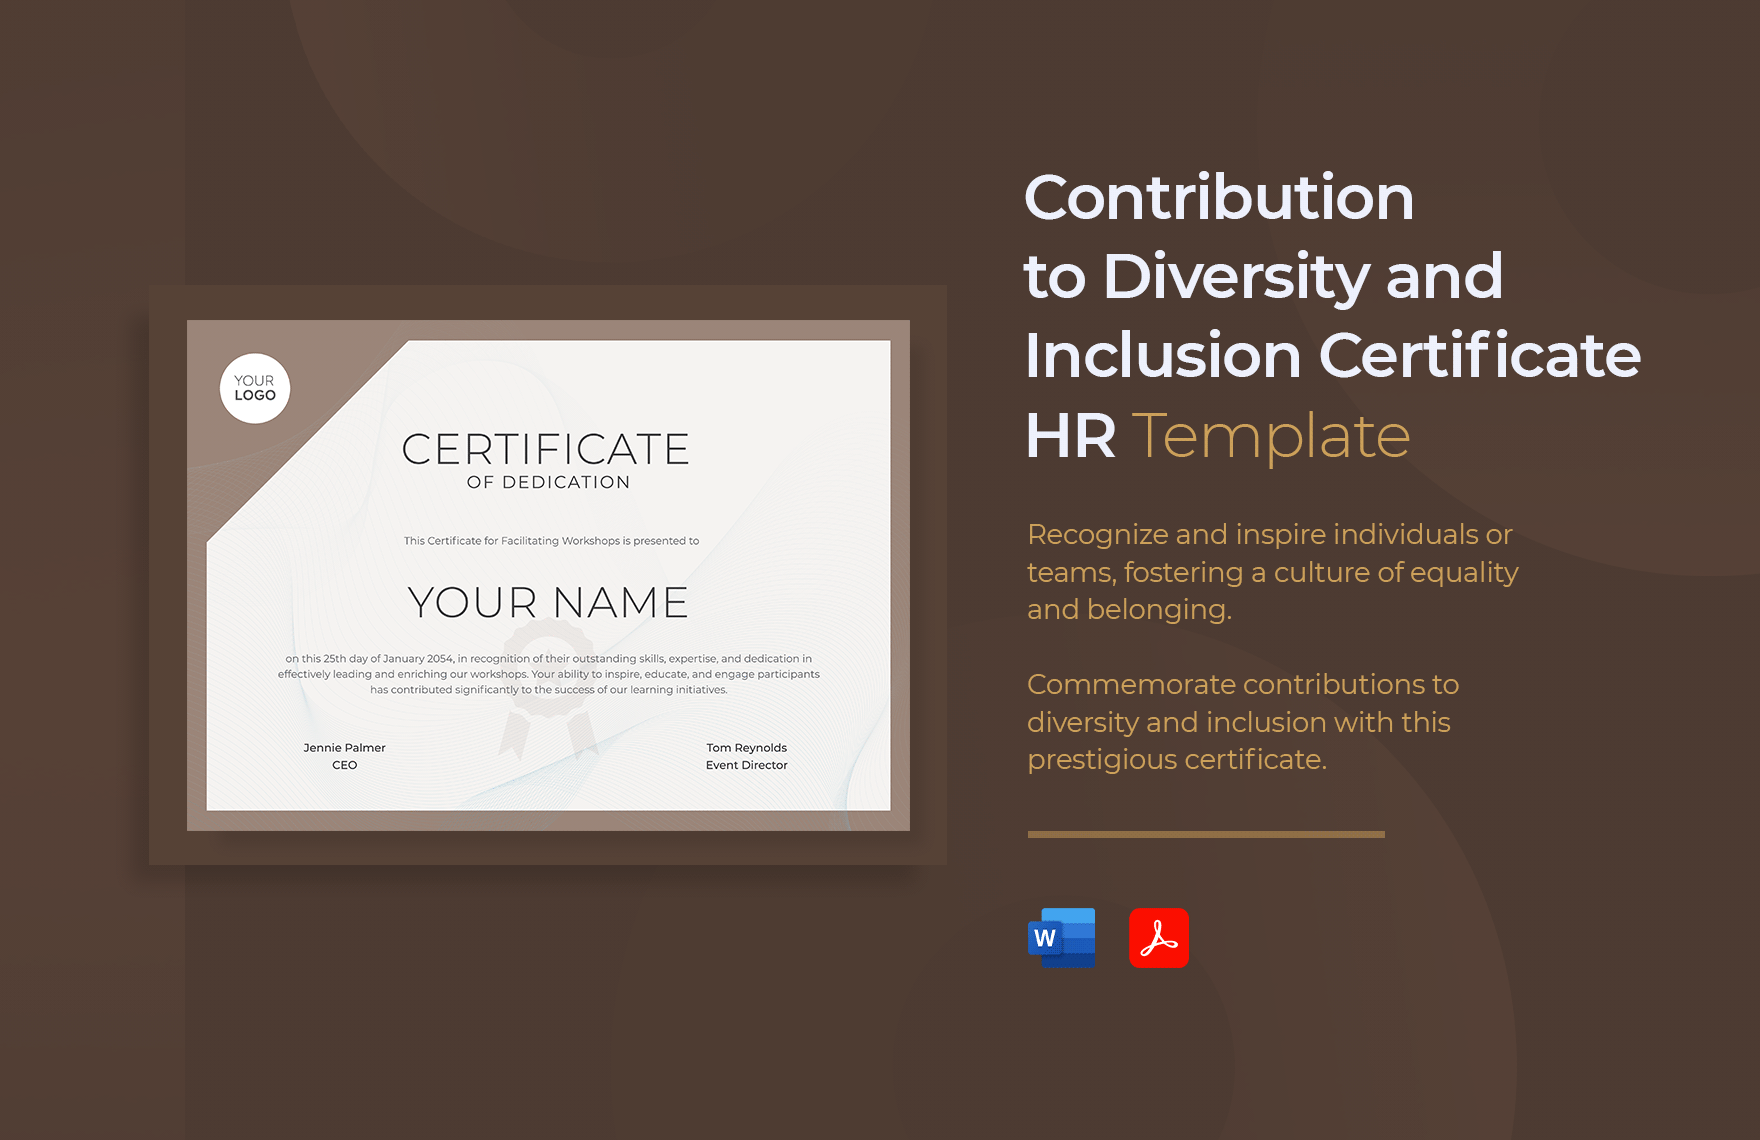 Contribution to Diversity and Inclusion Certificate HR Template